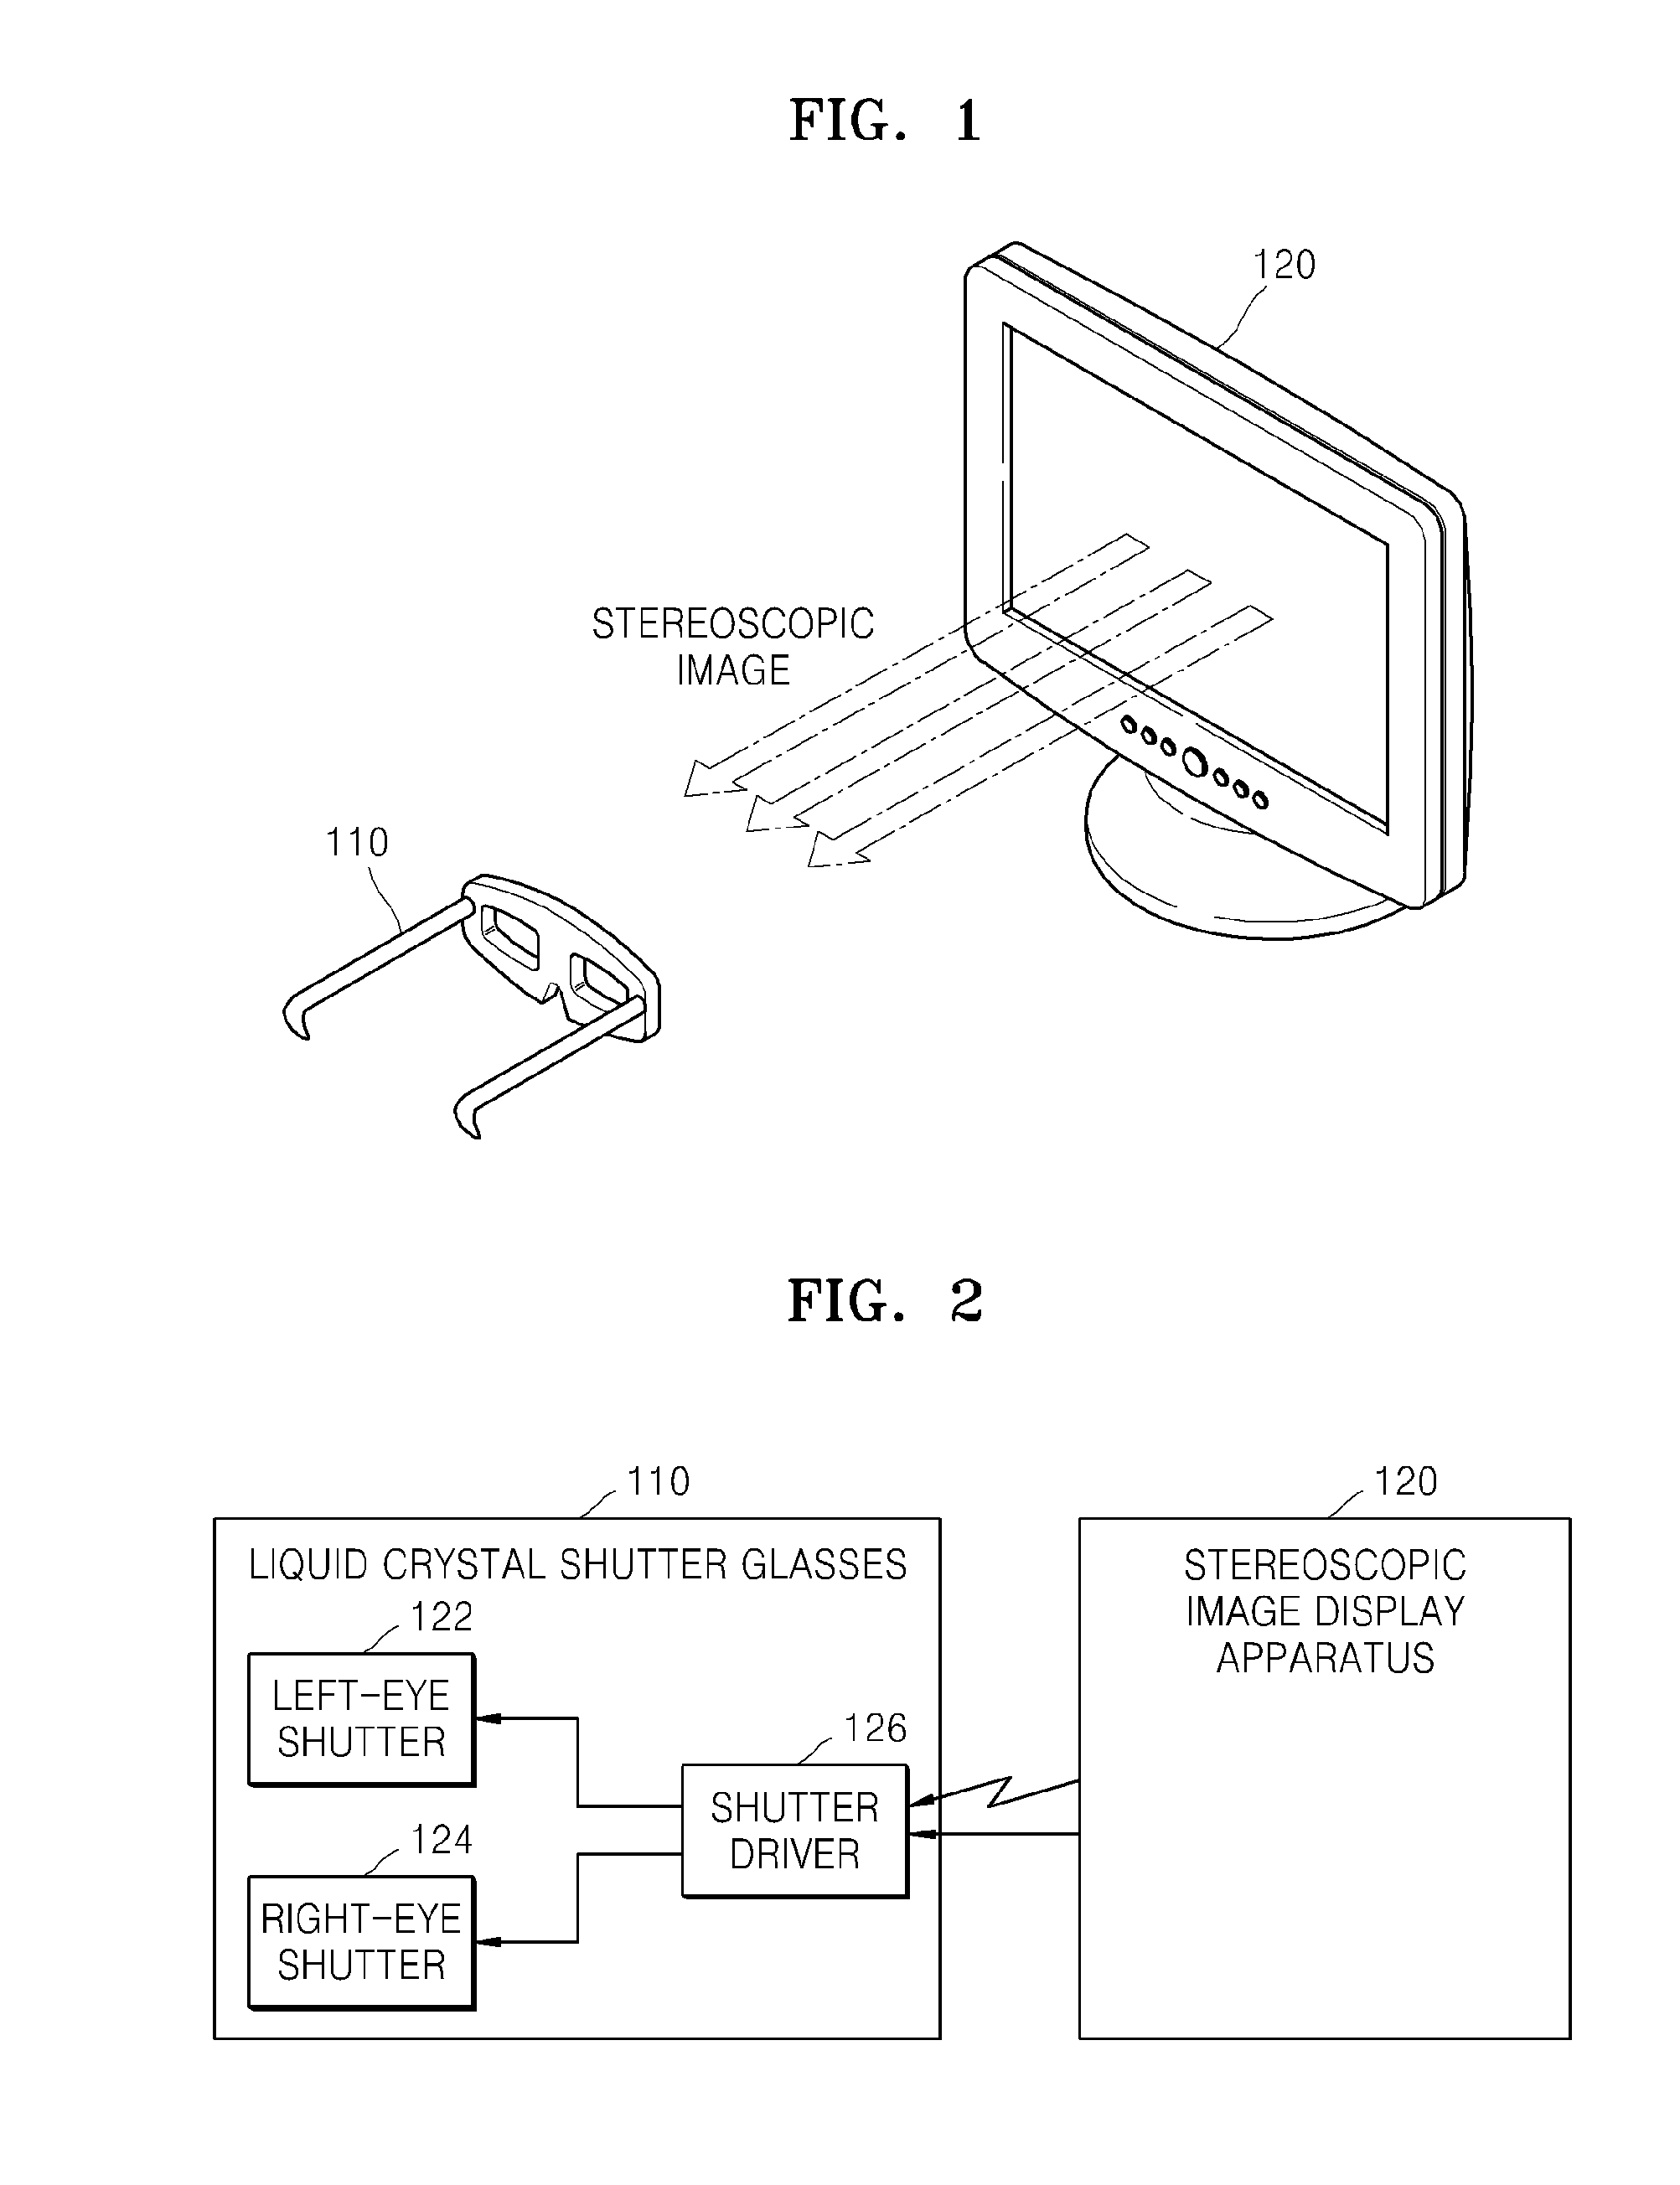 Method and apparatus for displaying stereoscopic image